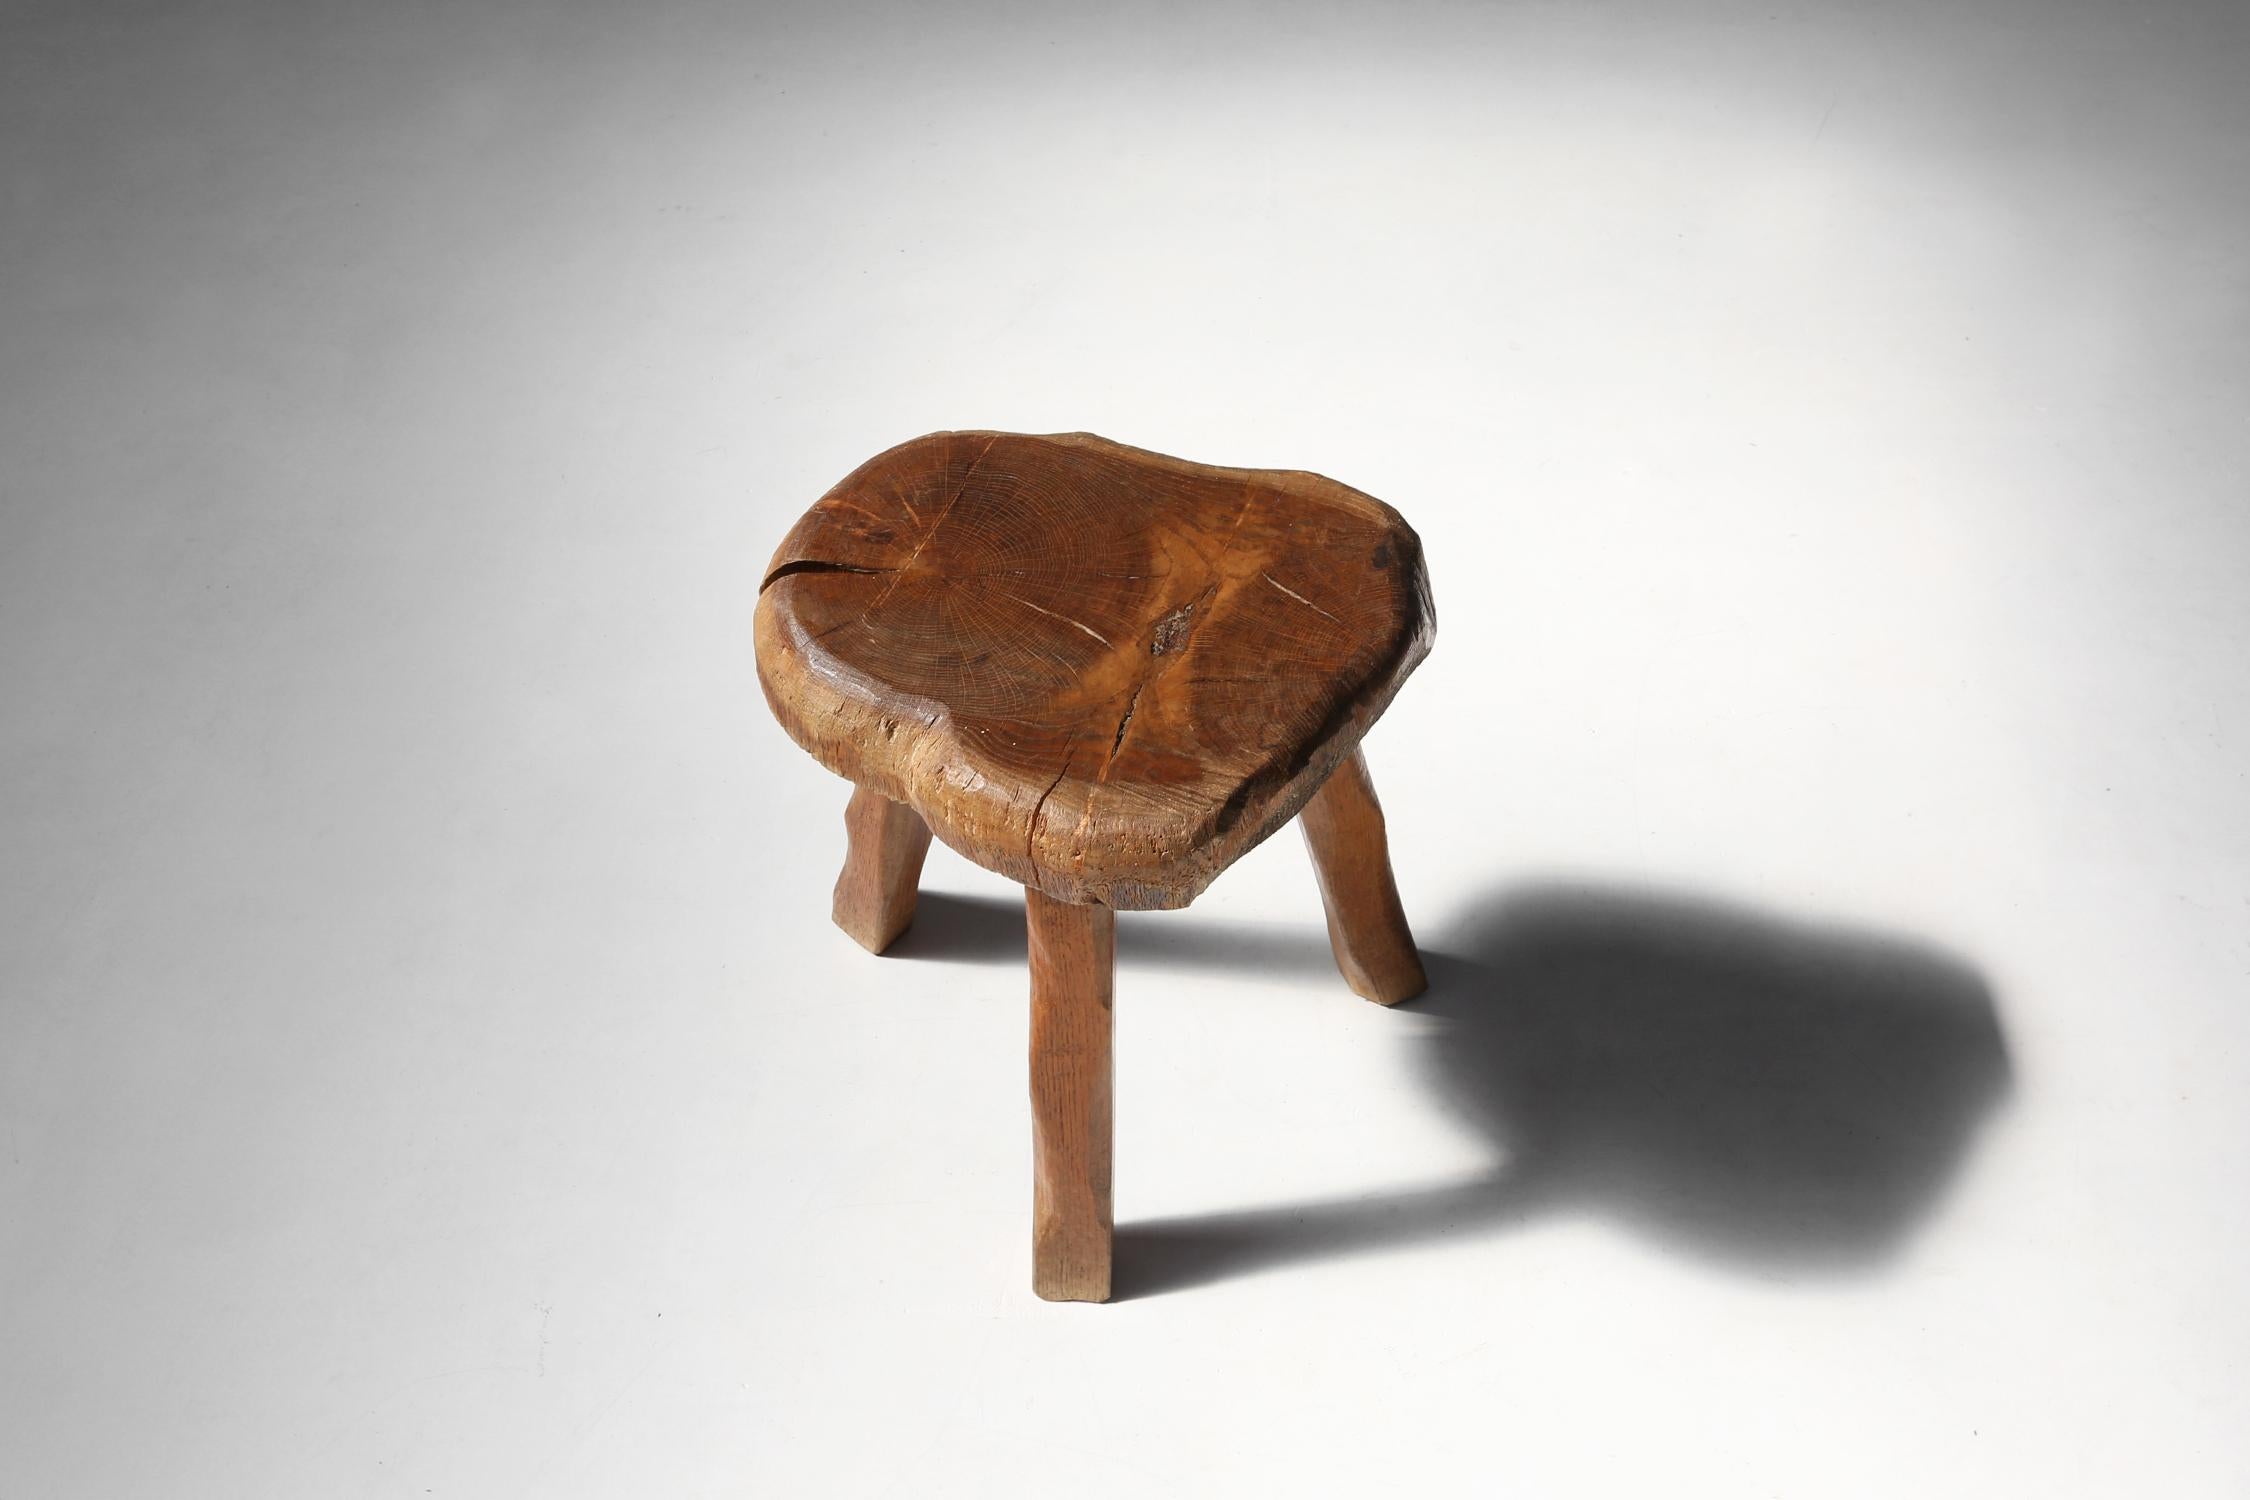 This 19th century wooden stool made from a tree trunk is a unique and authentic piece of furniture that adds a rustic atmosphere to any room.

The wood has a brown color that gives the stool a beautiful patina on the wood.